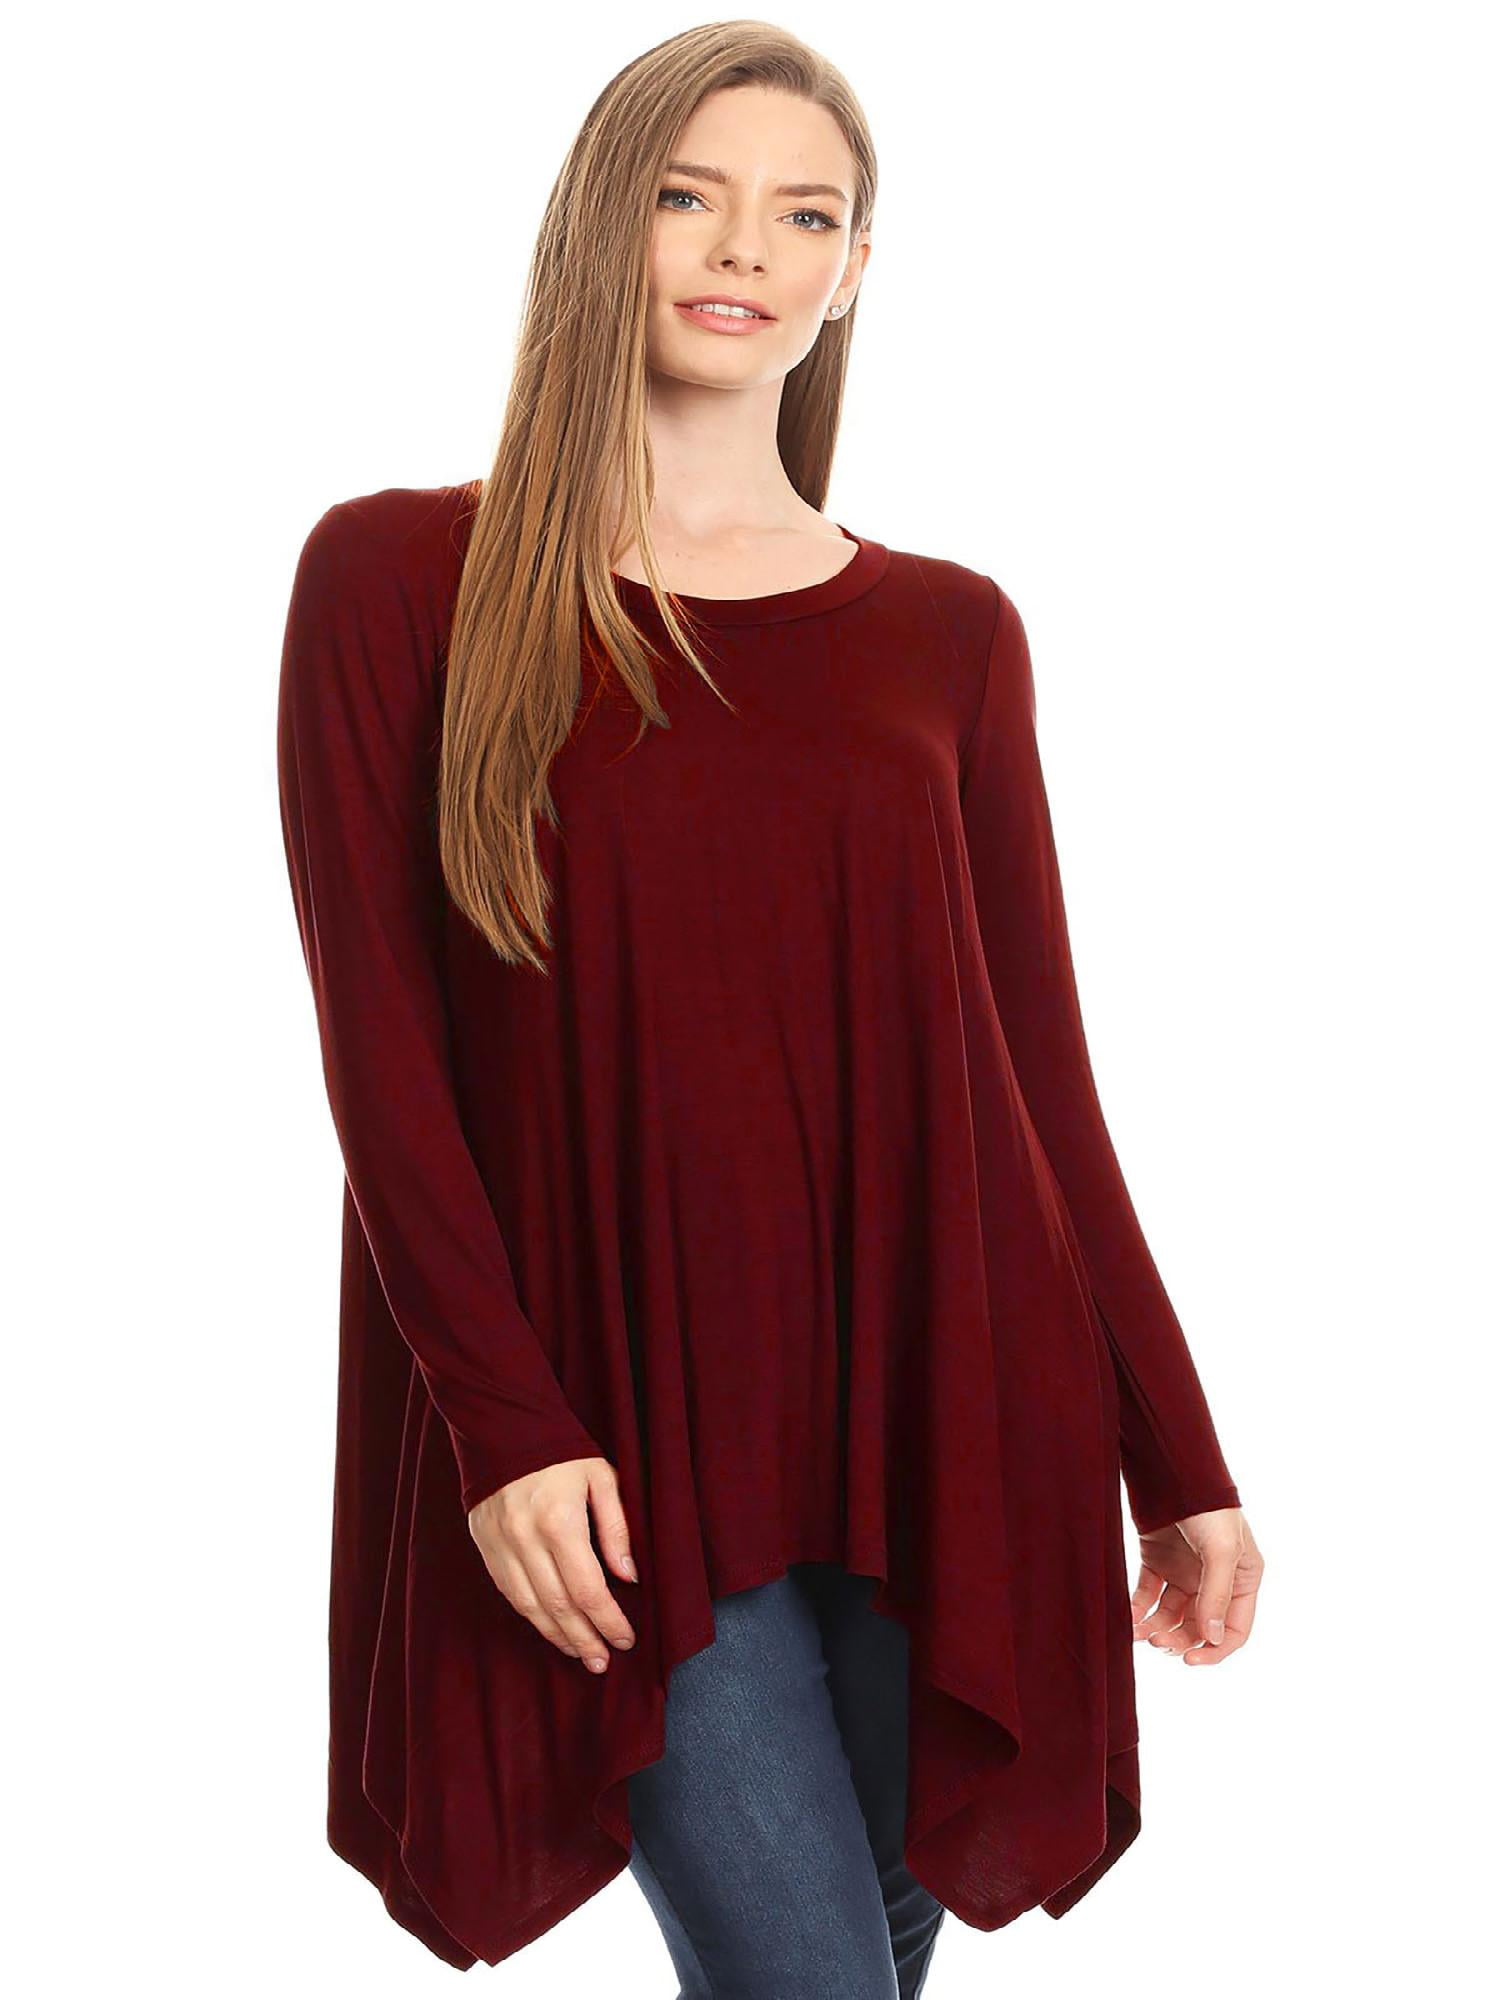 Women's Casual Long Sleeve Loose fit Tunic Top Dress with Plus Size ...